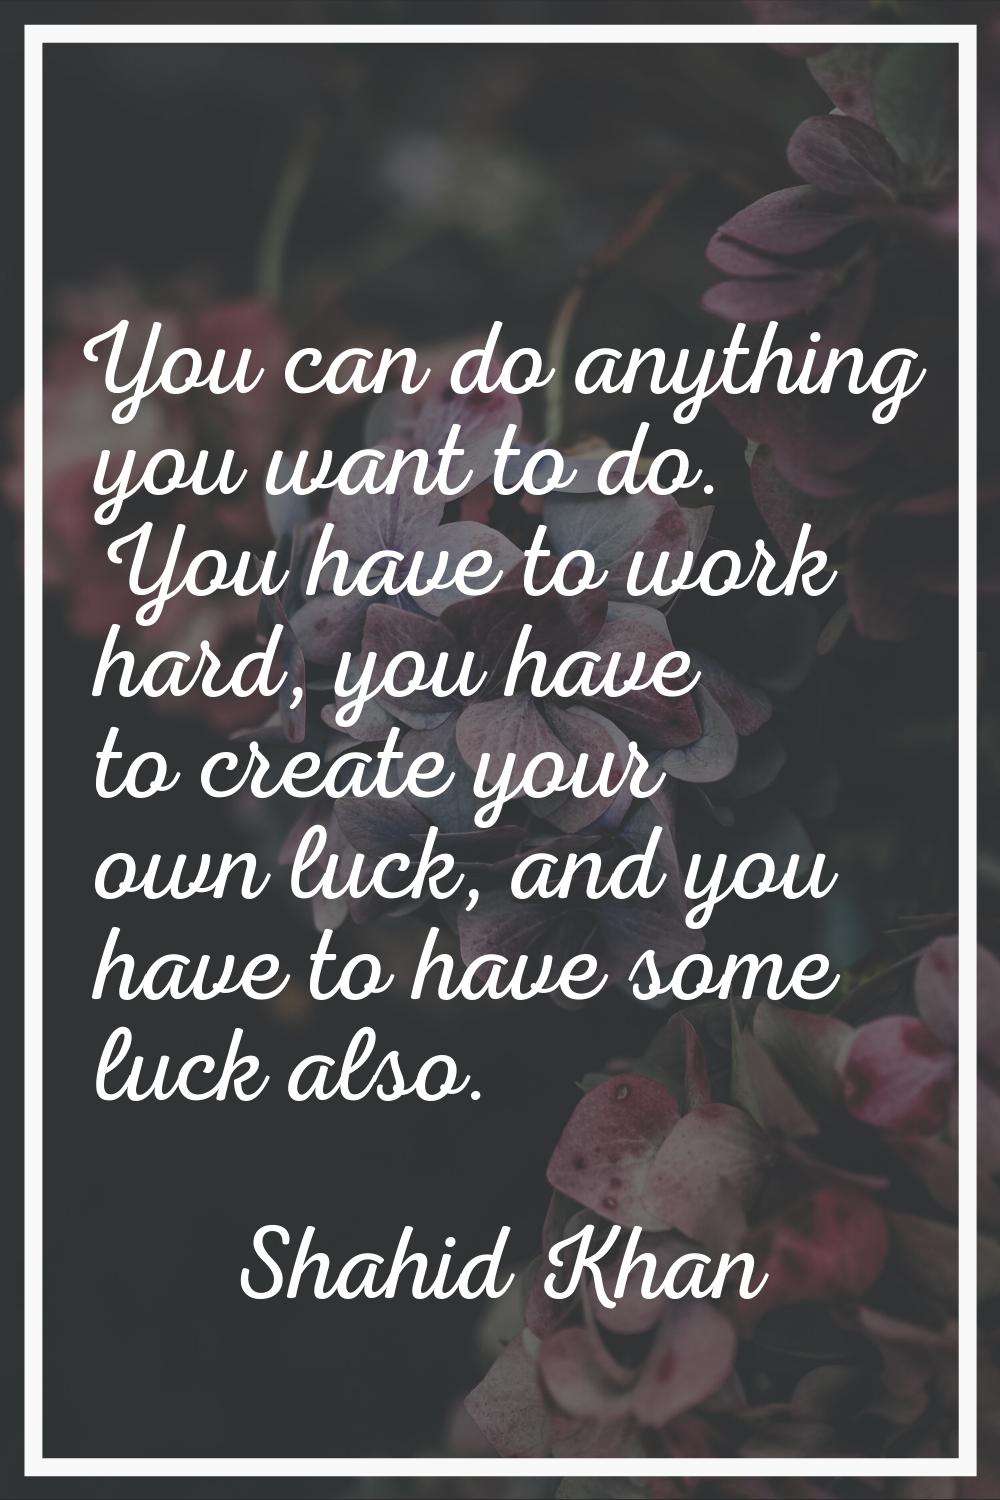 You can do anything you want to do. You have to work hard, you have to create your own luck, and yo